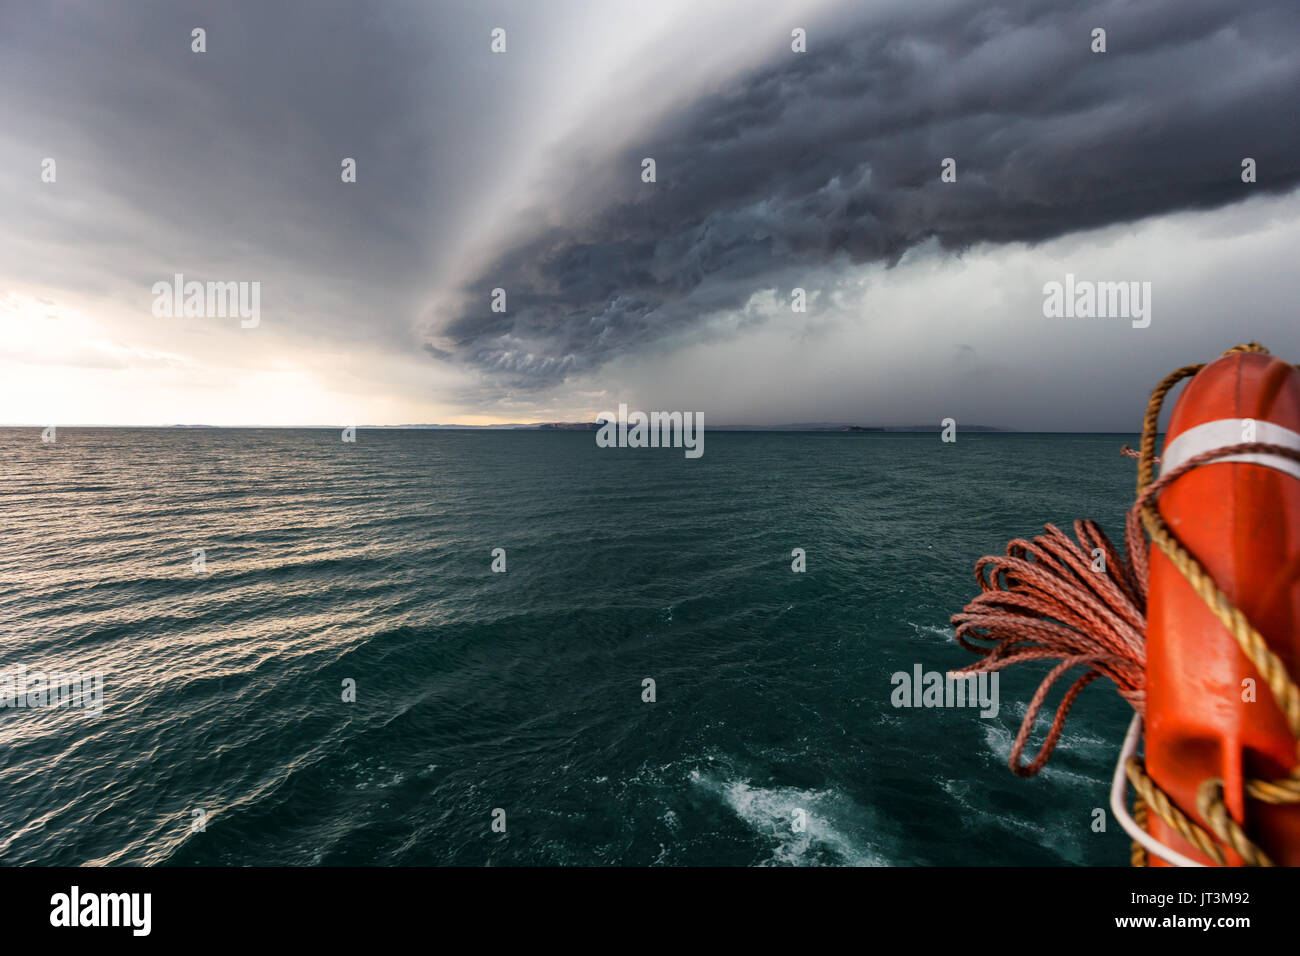 Running from fast coming storm with boat, approaching storm on lake Stock Photo